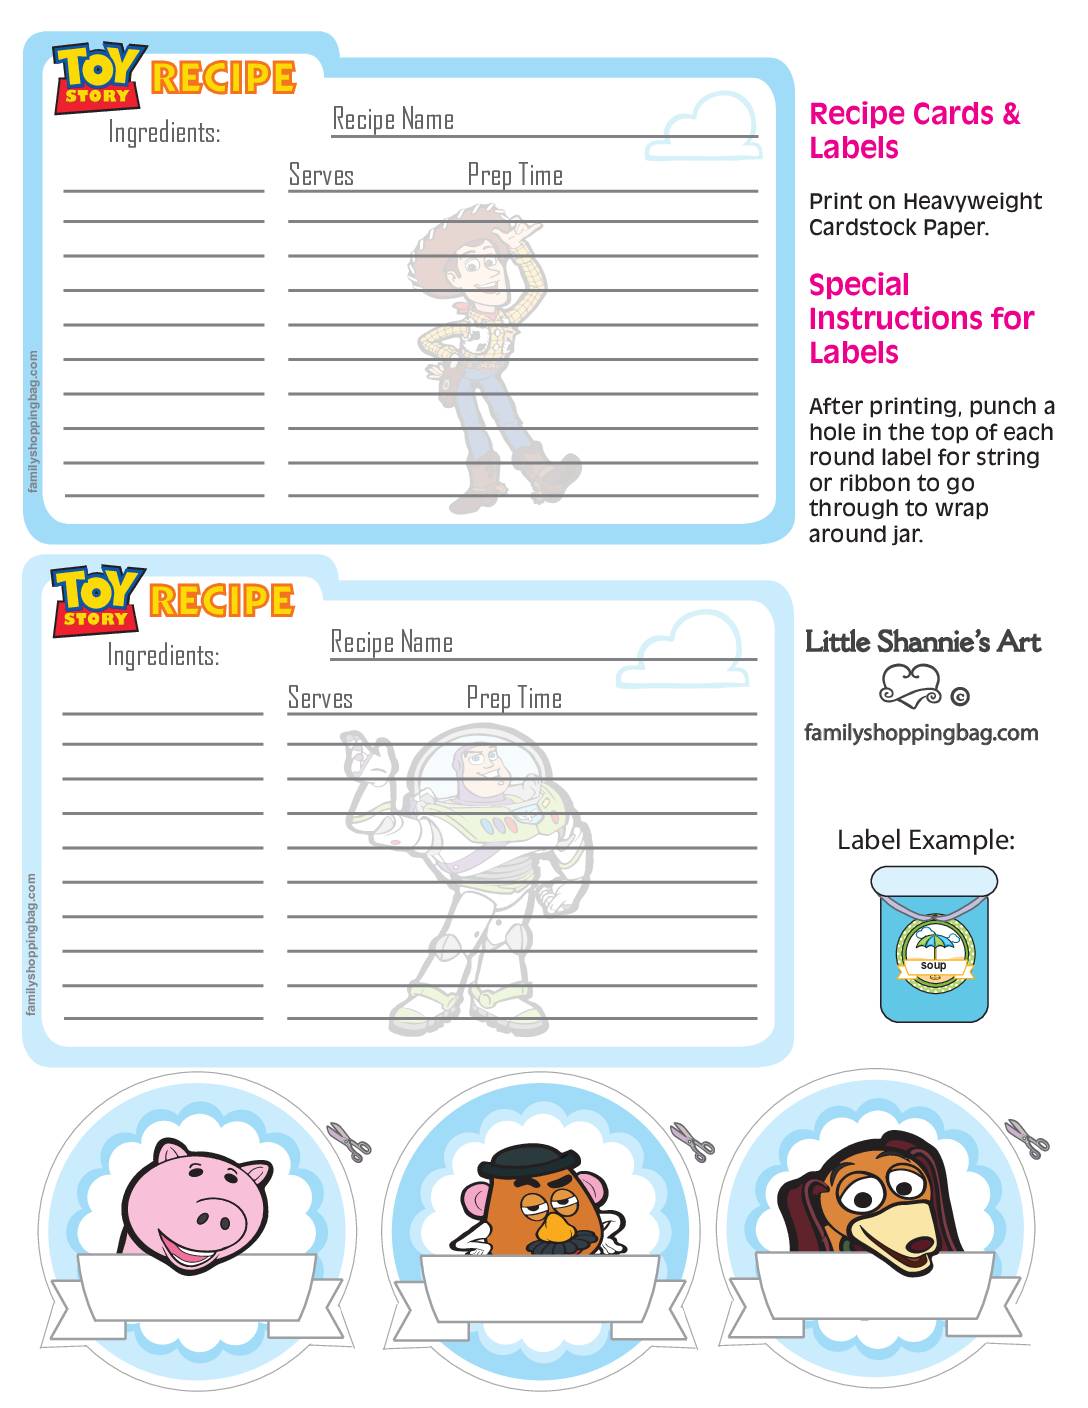 Recipe Cards Toy Story Recipe Cards